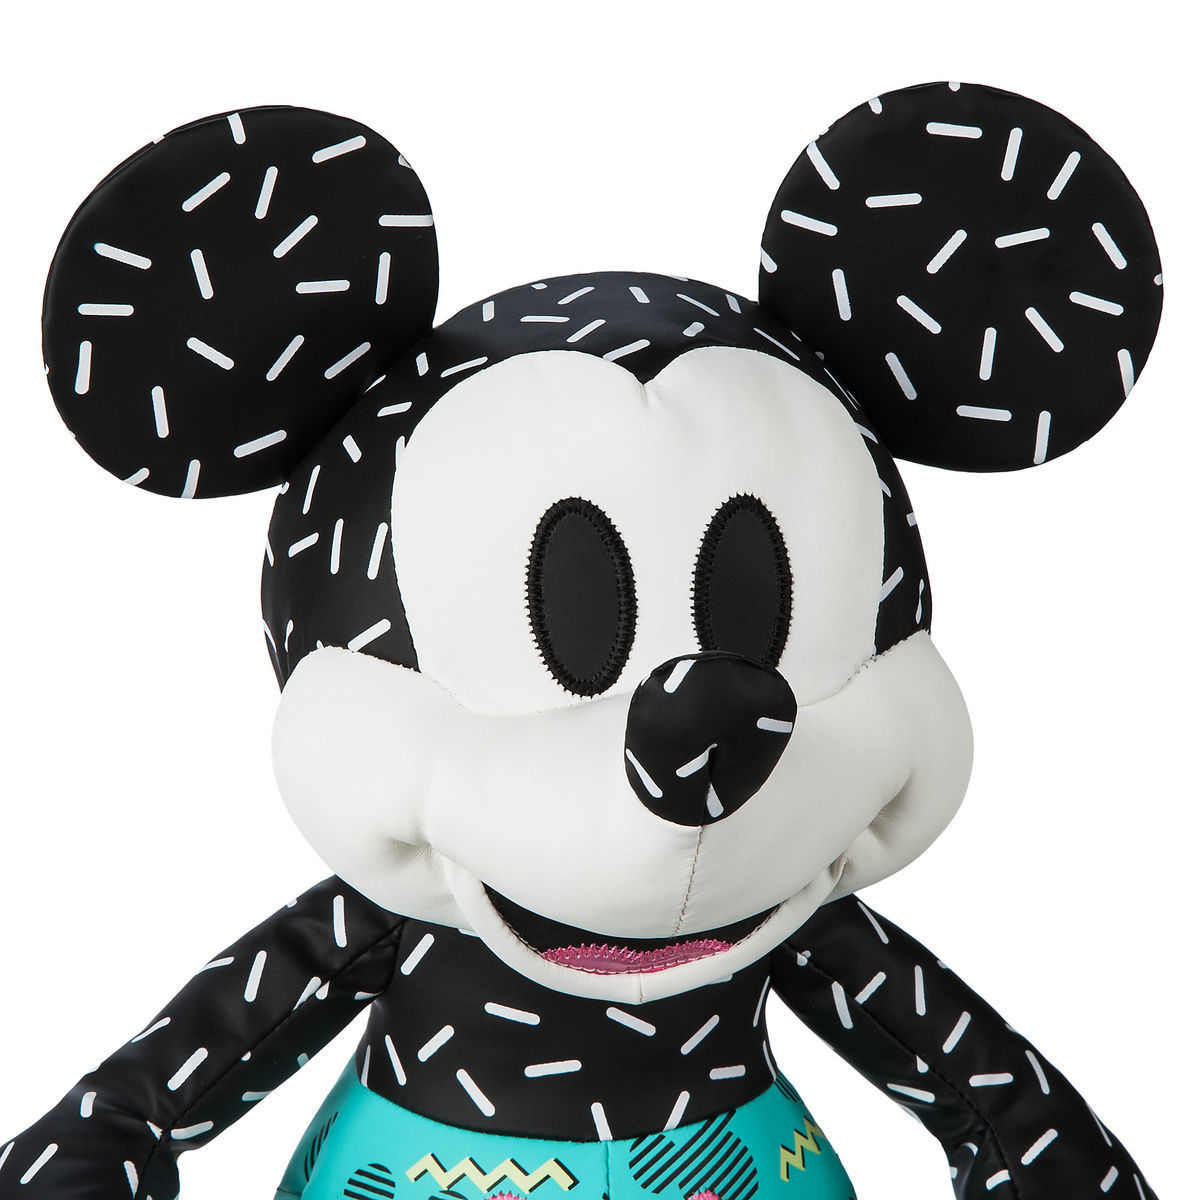 Mickey Mouse Memories Plush - September 2018 - Limited Edition